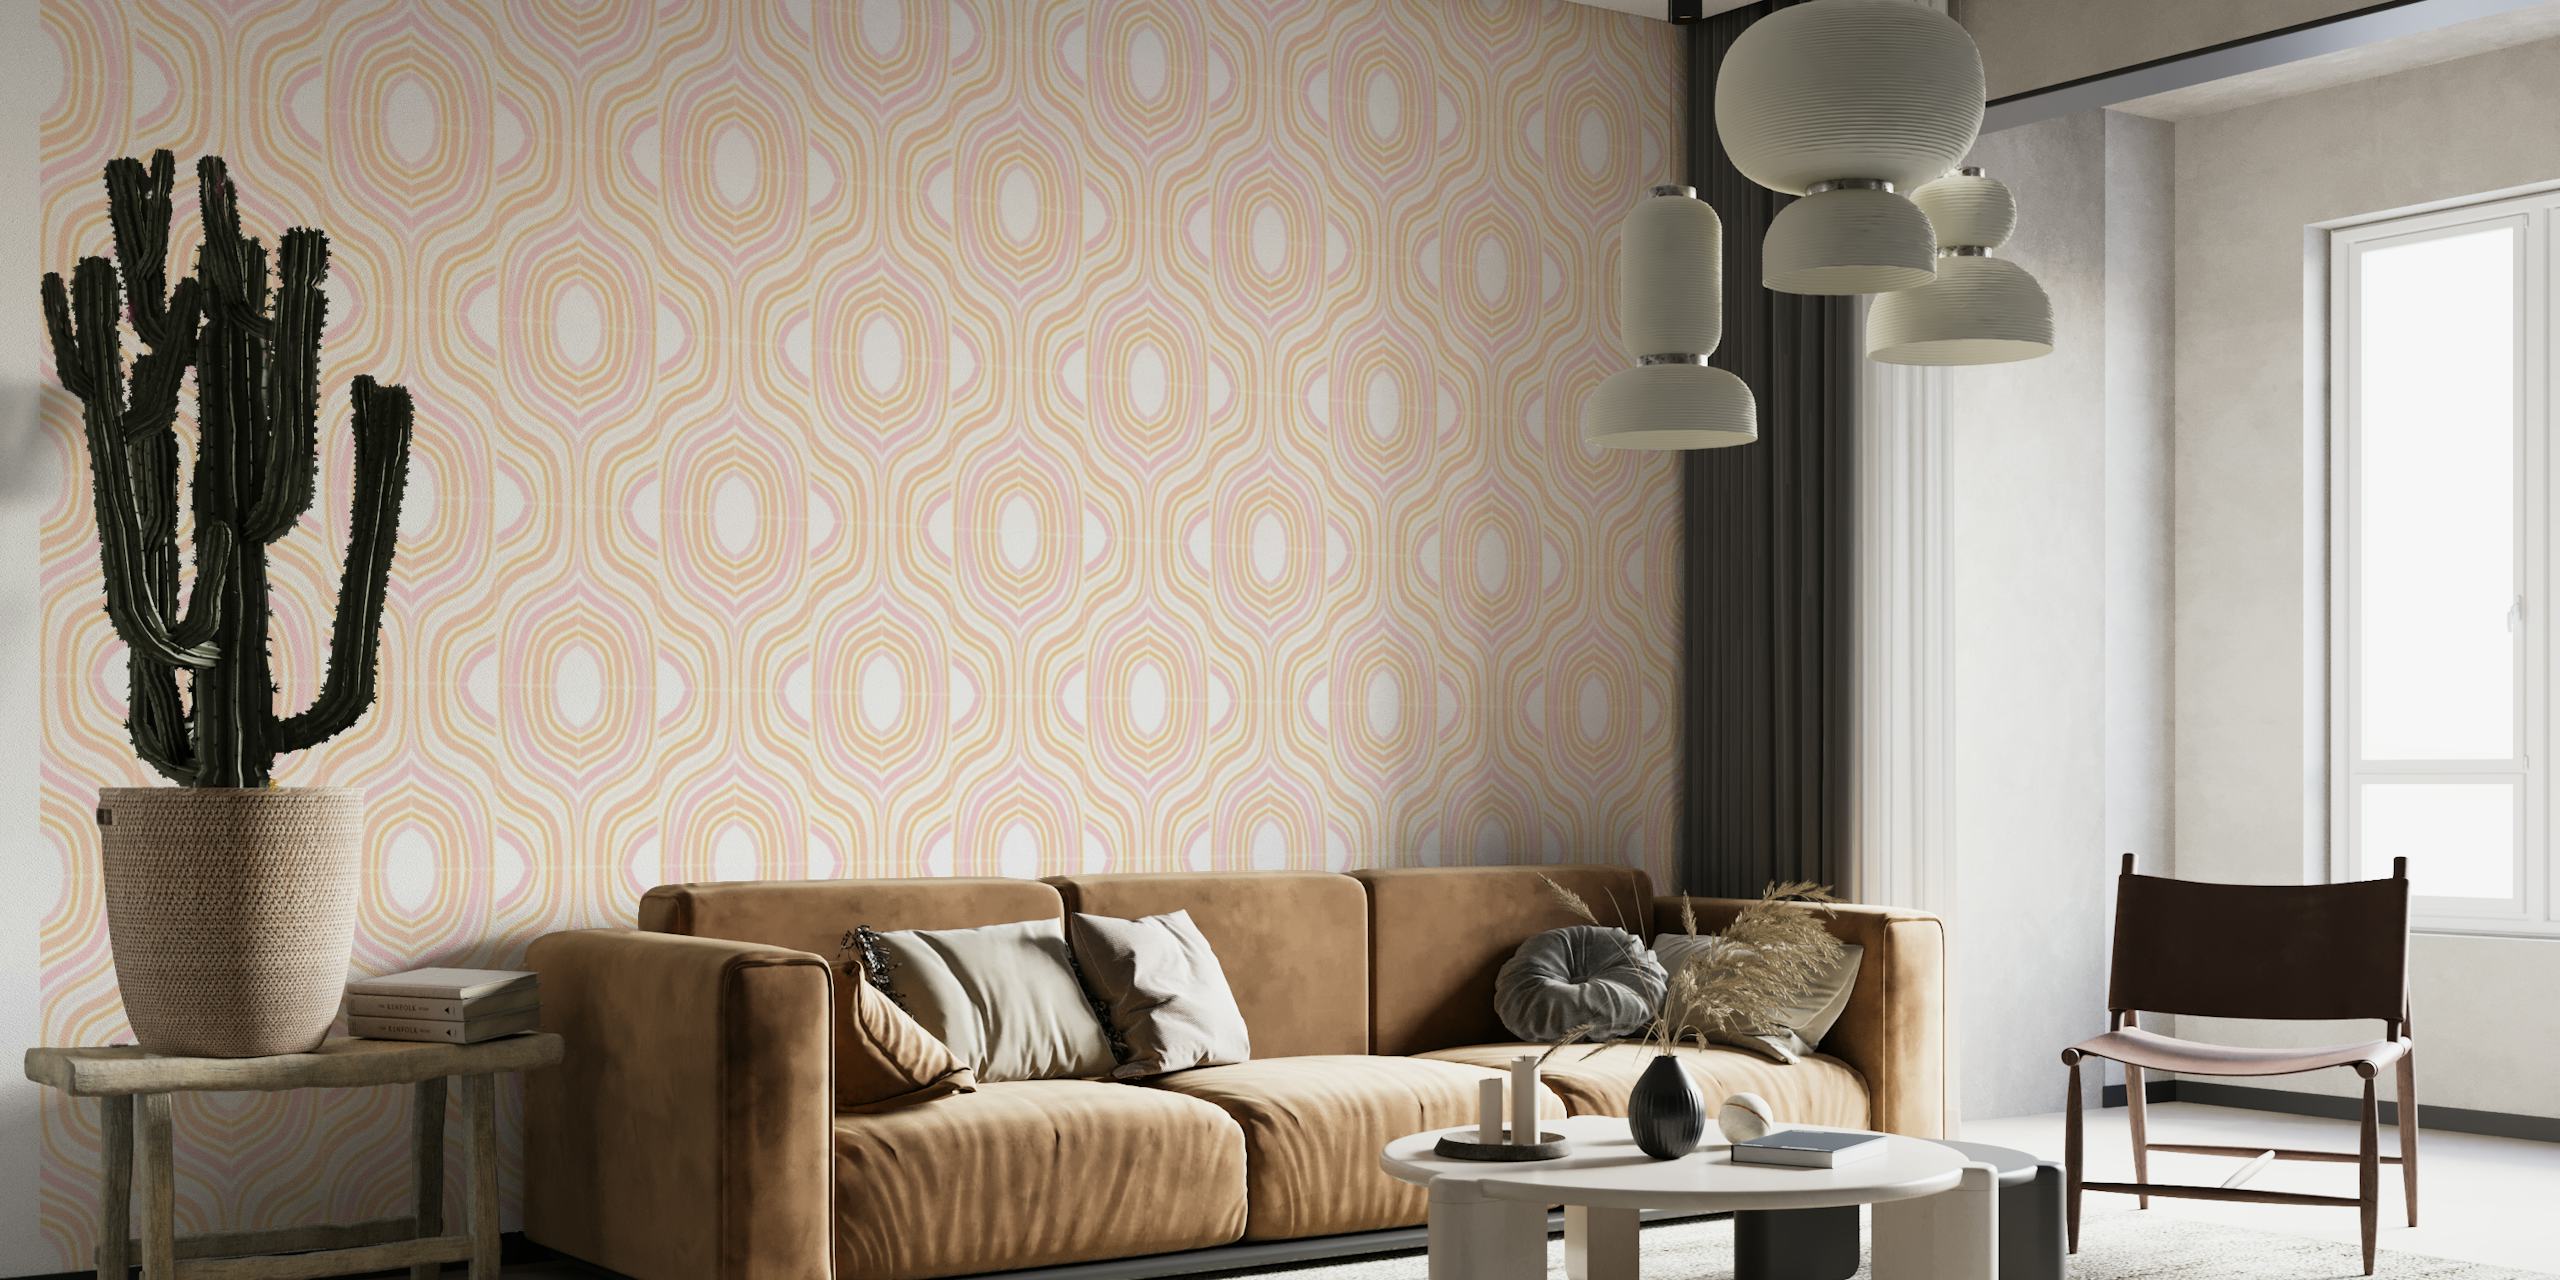 Peachy Marbled Tiles ταπετσαρία